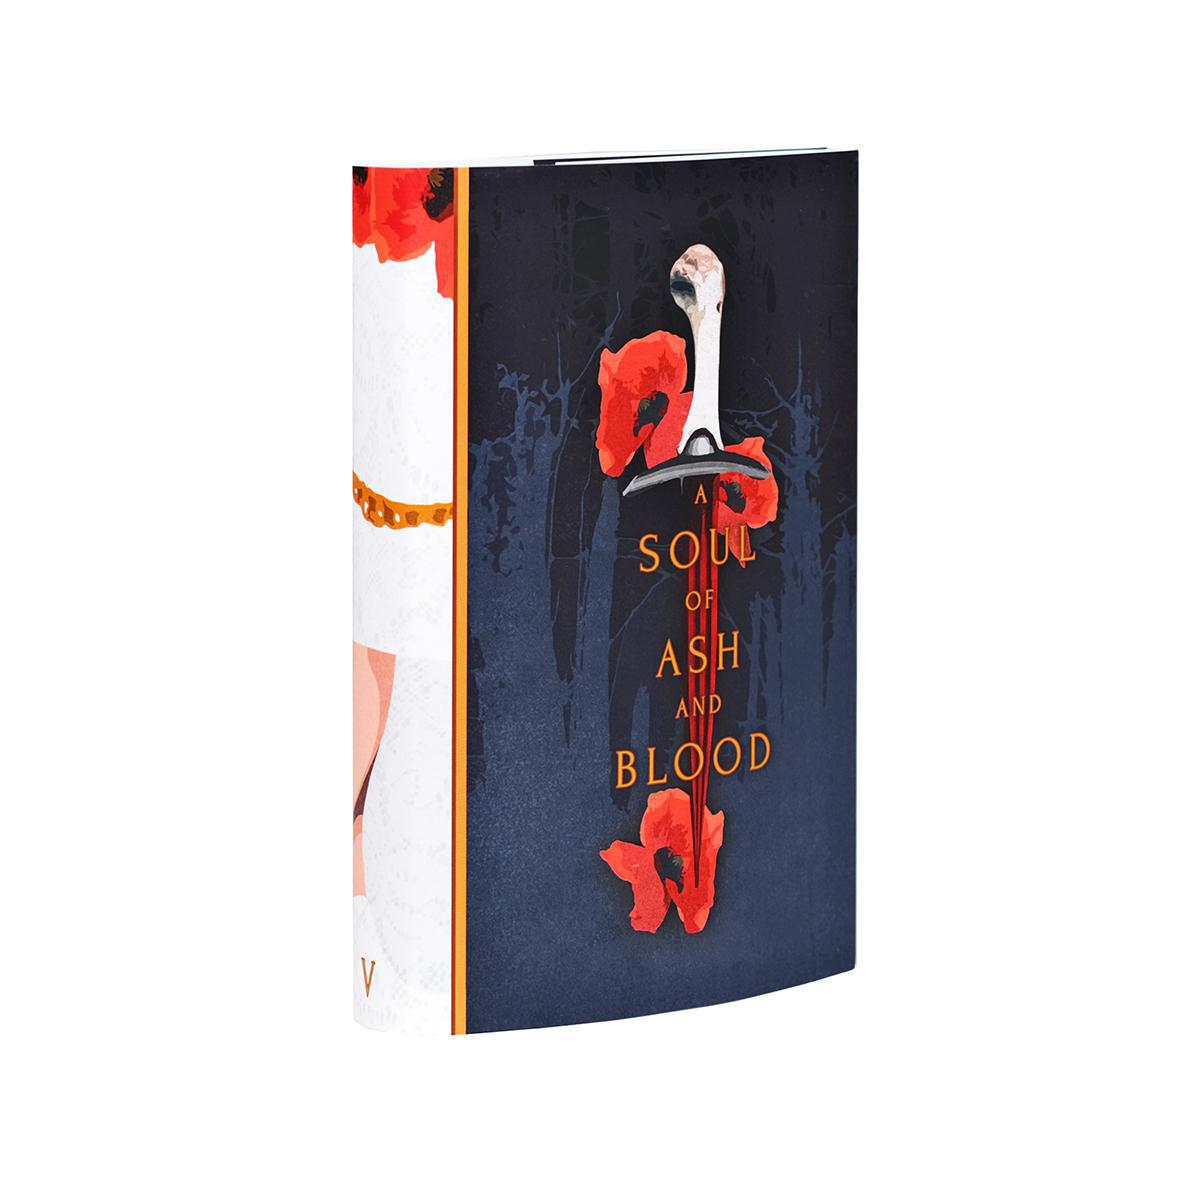 Blood and Ash: A Soul of Ash and Blood - Single Book - MTO